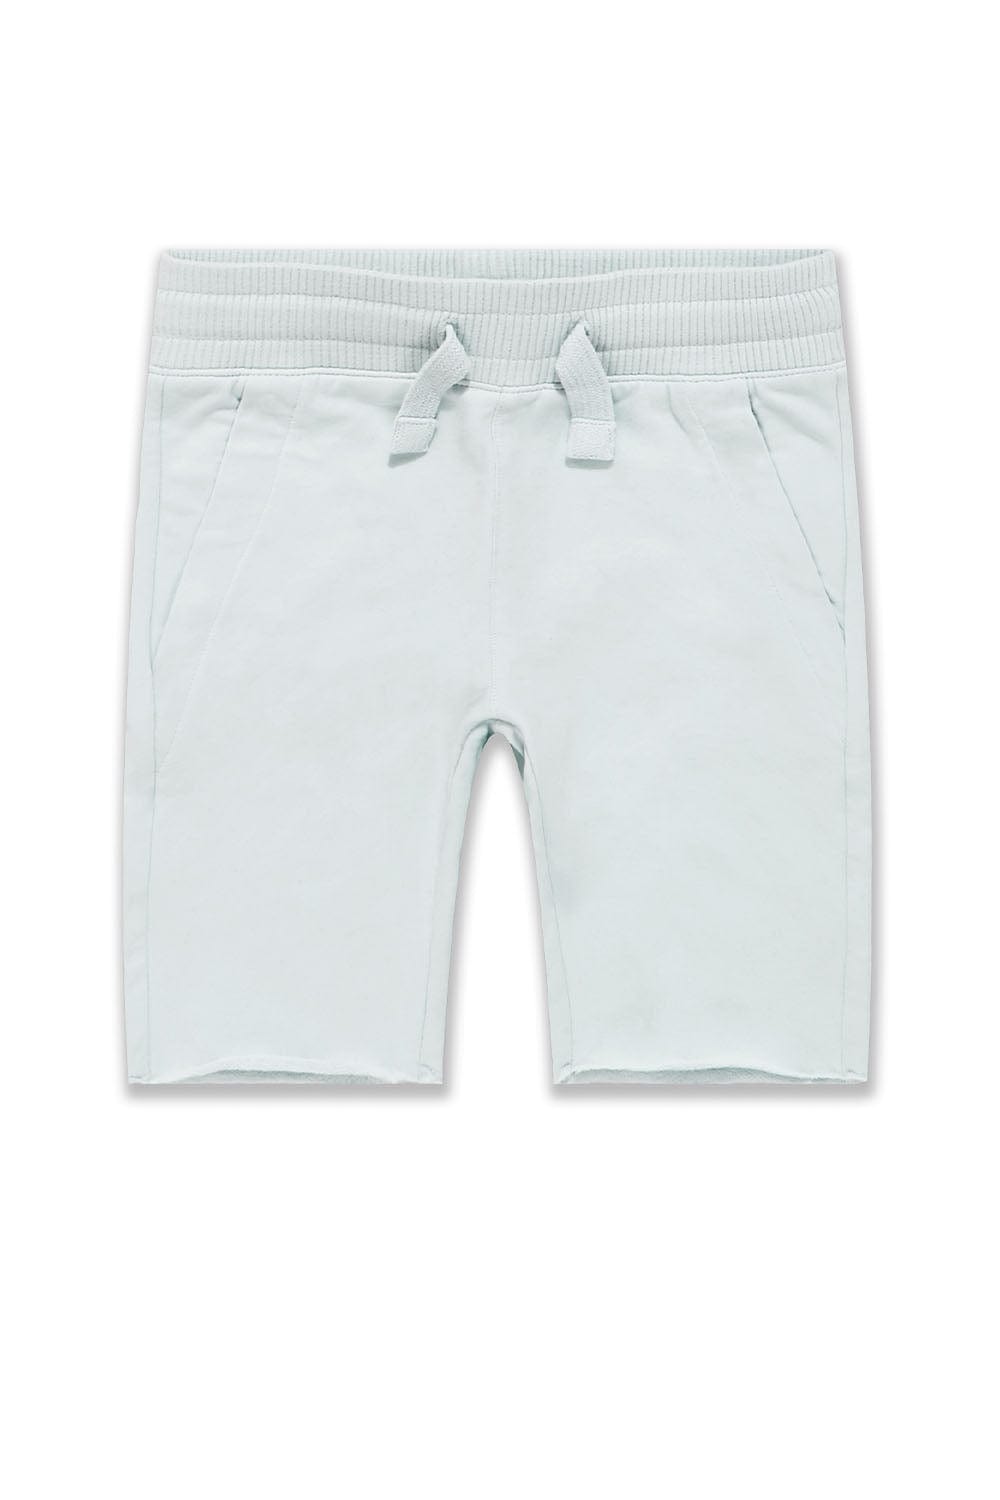 JC Kids Kids Palma French Terry Shorts (Exclusive Colors) Sky Foam / 2